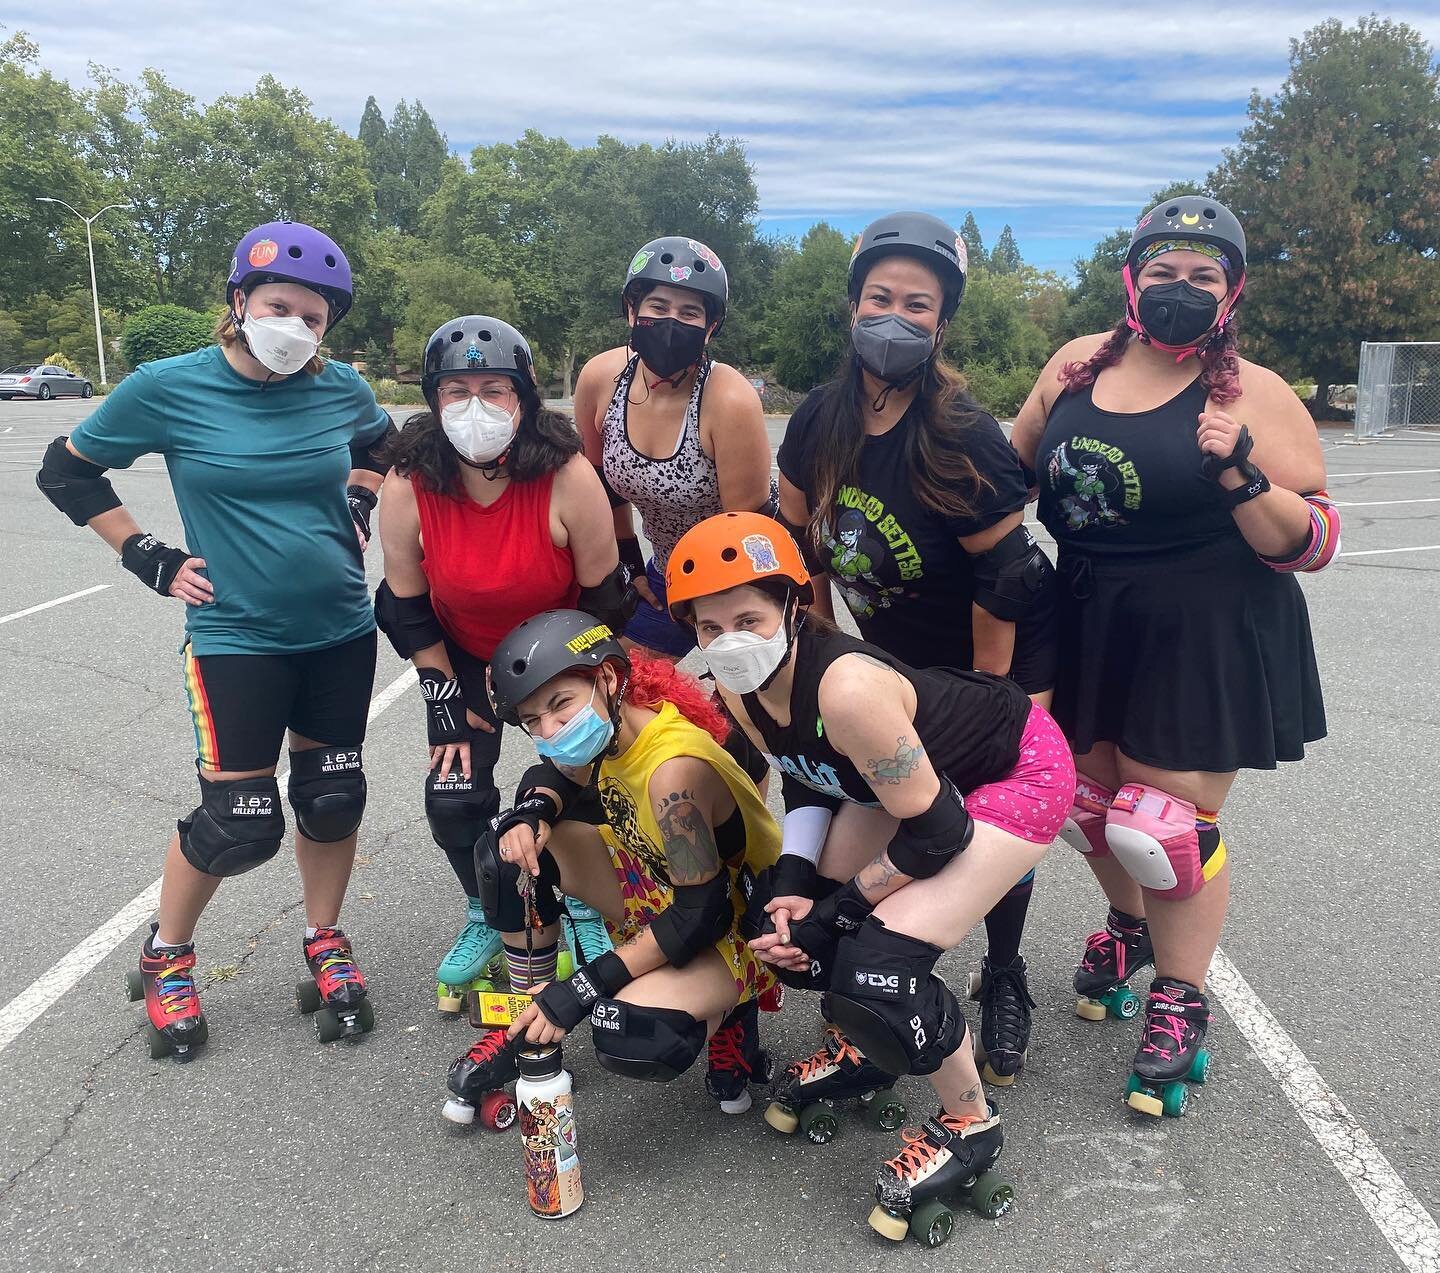 A fun Monday skate sesh💜💚 
 
Don&rsquo;t forget to grab tickets for our derby tournament this weekend! More info on our last post. 

🎟 https://m.bpt.me/event/5460107

#rollerskates #rollerderby #undeadrollerderby #rollerskating #rollerderbylife #r